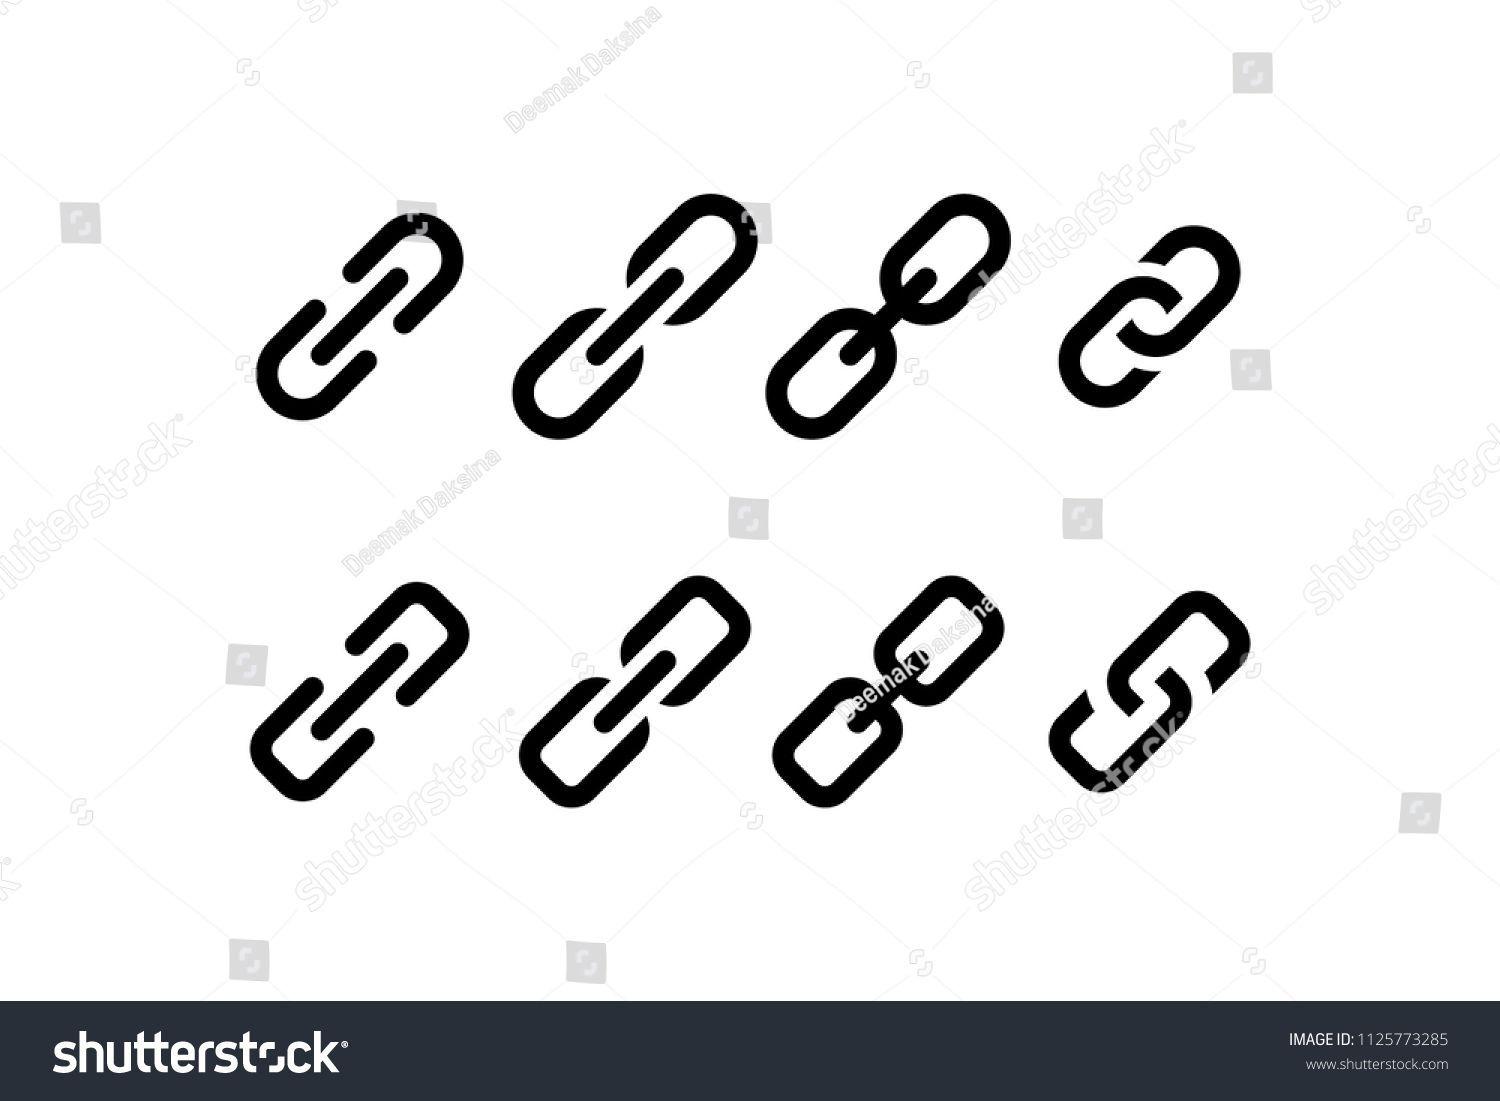 Hyperlink Logo - Chain / Link Icon Set. link, chain, connection, linked, hyperlink